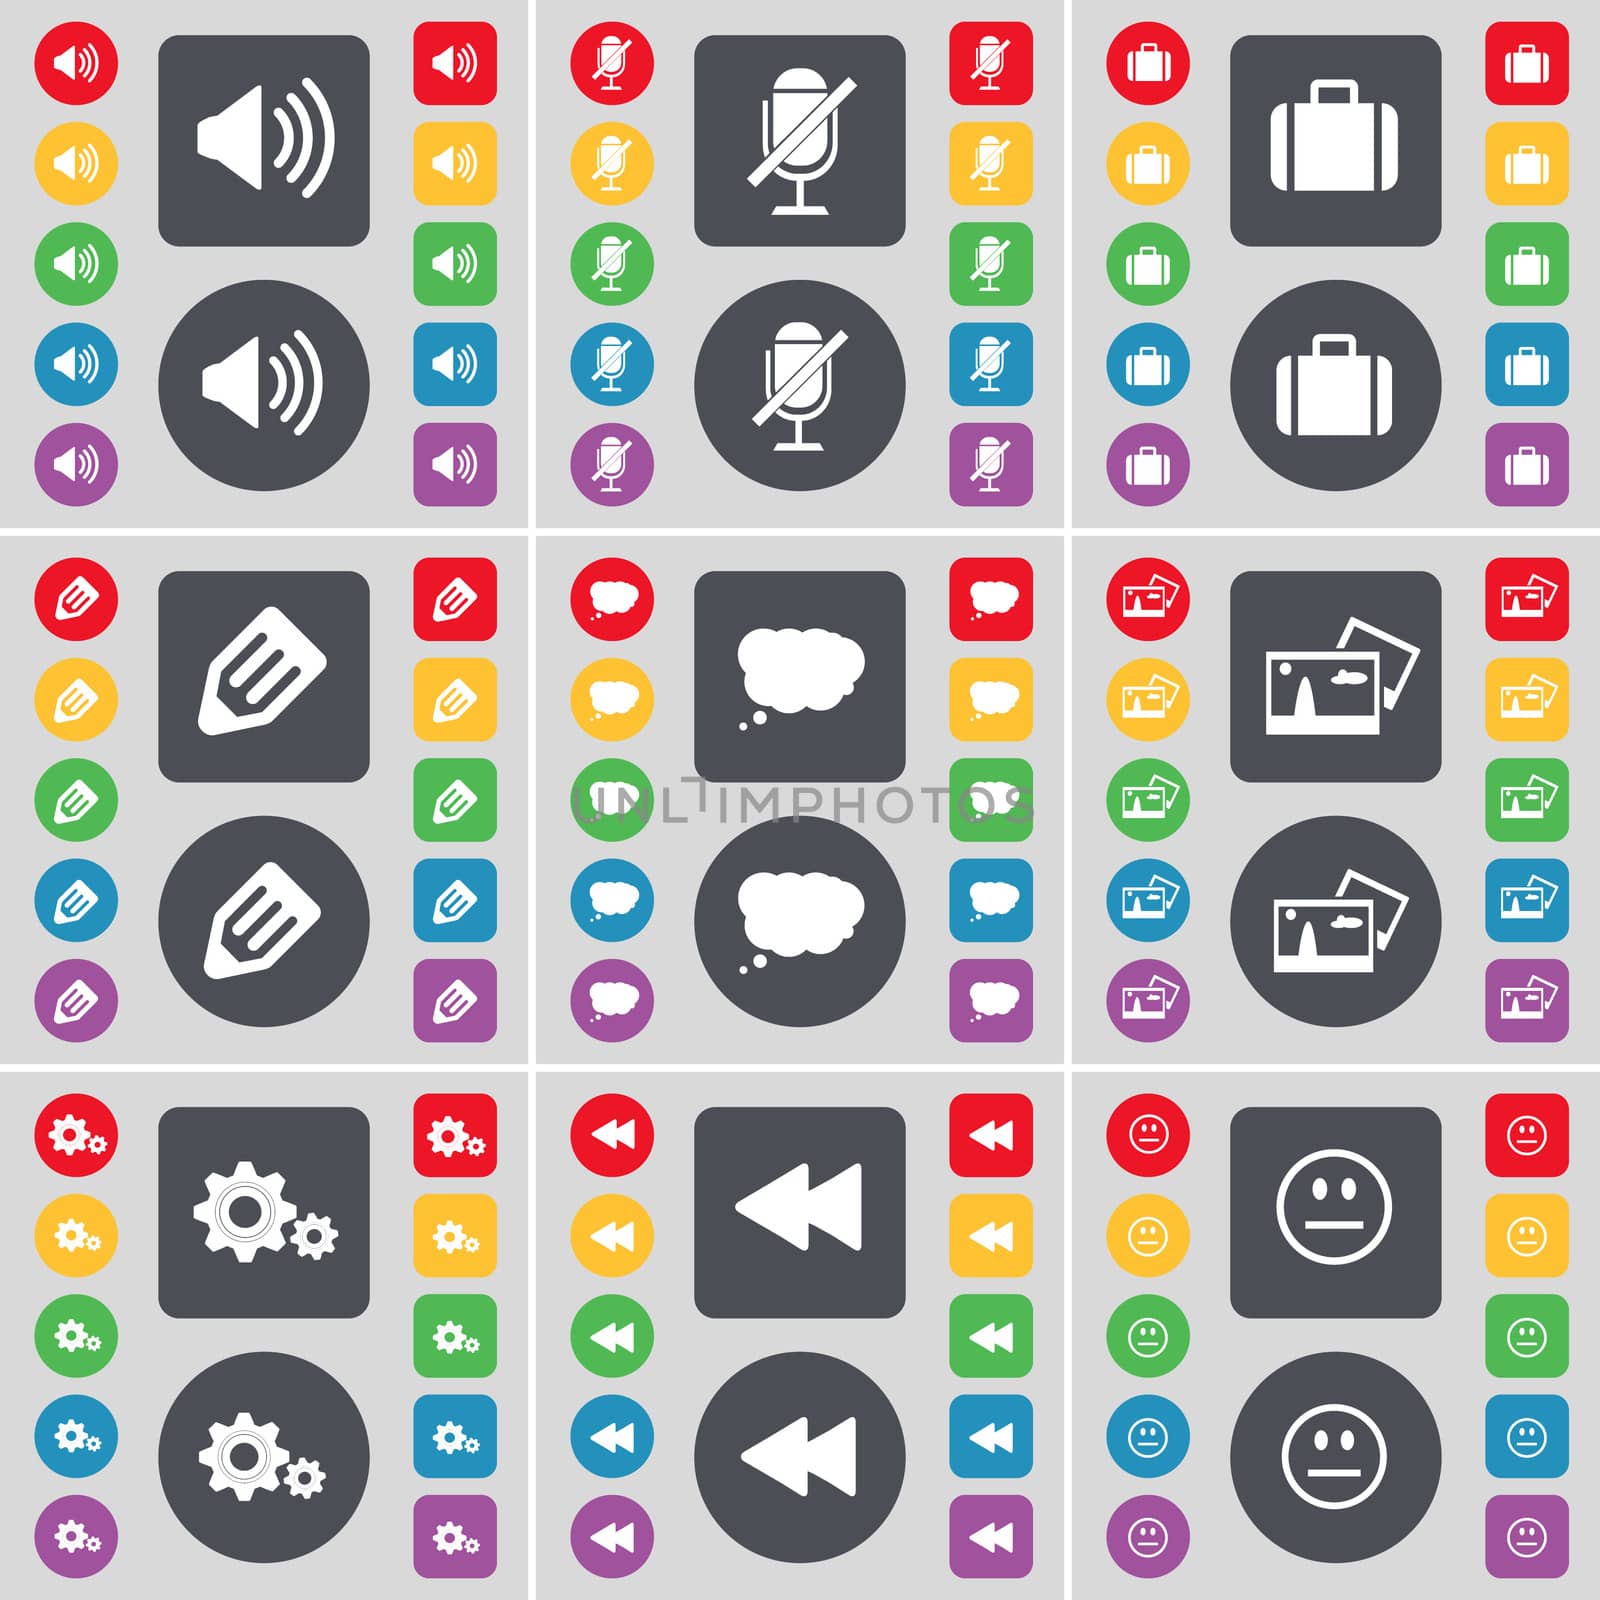 Sound, Microphone, Suitcase, Pencil, Chat cloud, Picture, Gear, Rewind, Smile icon symbol. A large set of flat, colored buttons for your design. illustration